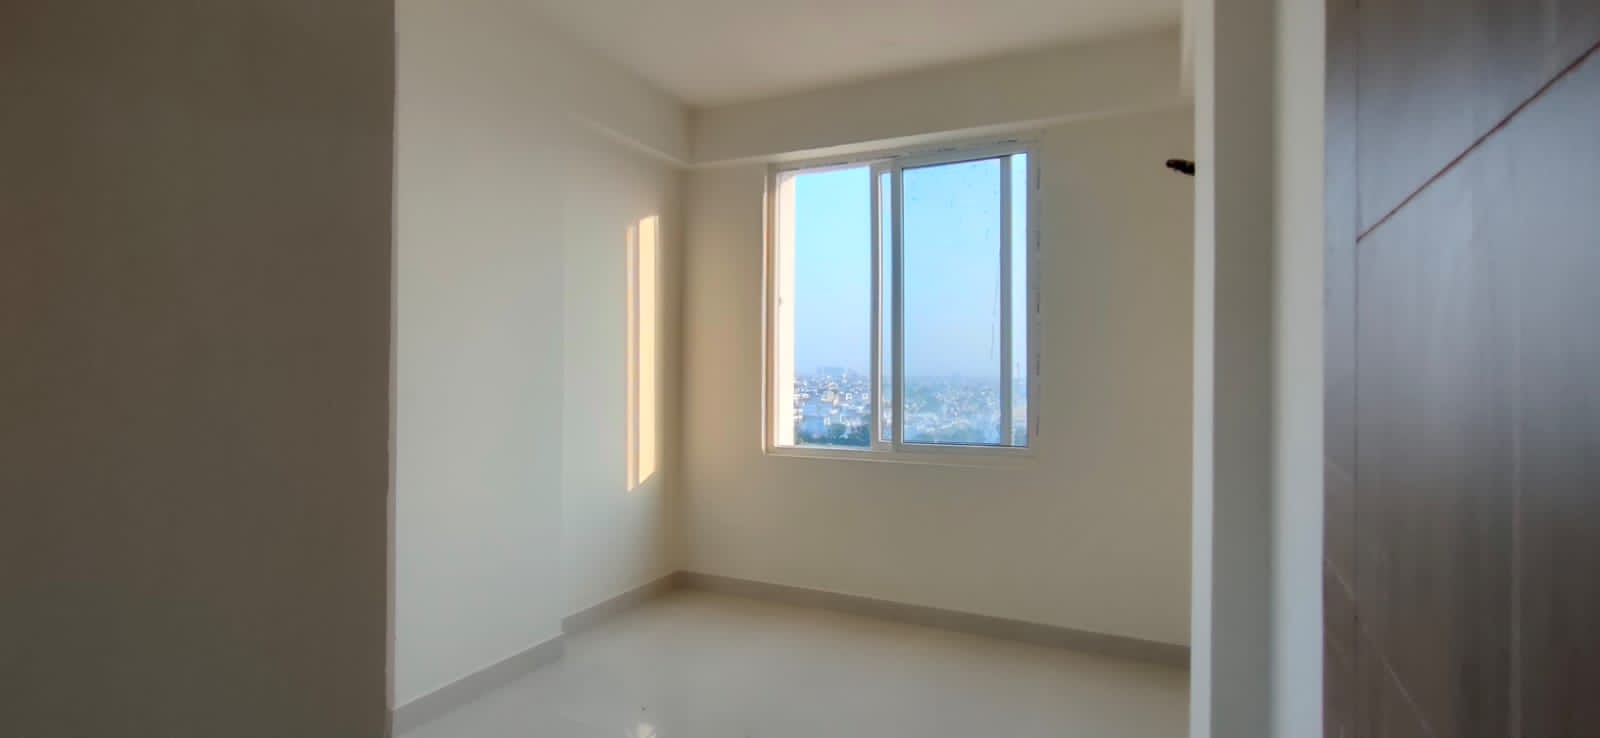 3 BHK High Rise Apartment for Rent Only in Jhotwara